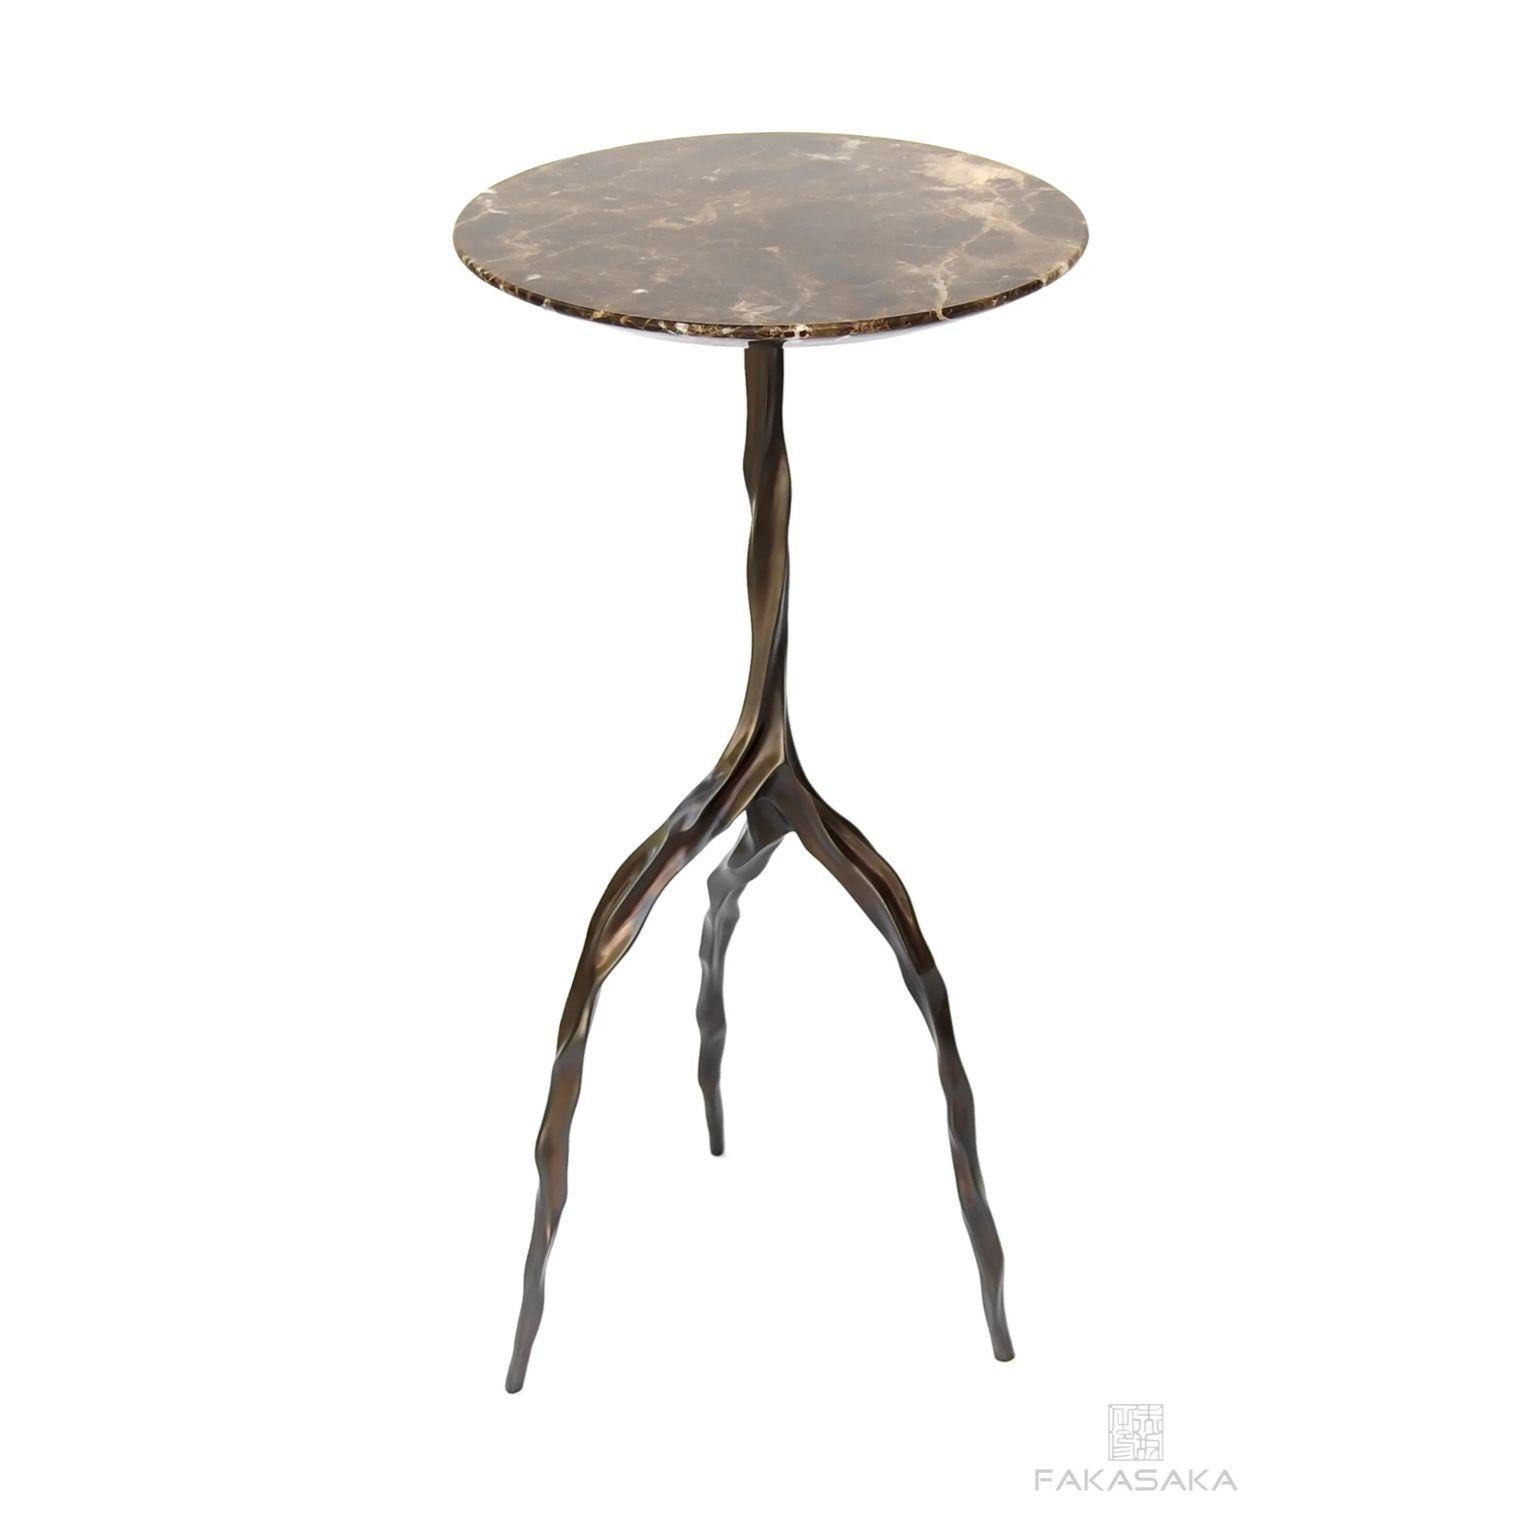 Nina drink table with Marrom Imperial marble top by Fakasaka Design
Dimensions: W 30 cm, D 30 cm, H 62 cm.
Materials: Dark bronze base, Marron Imperial marble top.
 
Also available in different table top materials:
Nero Marquina Marble 
Marrom